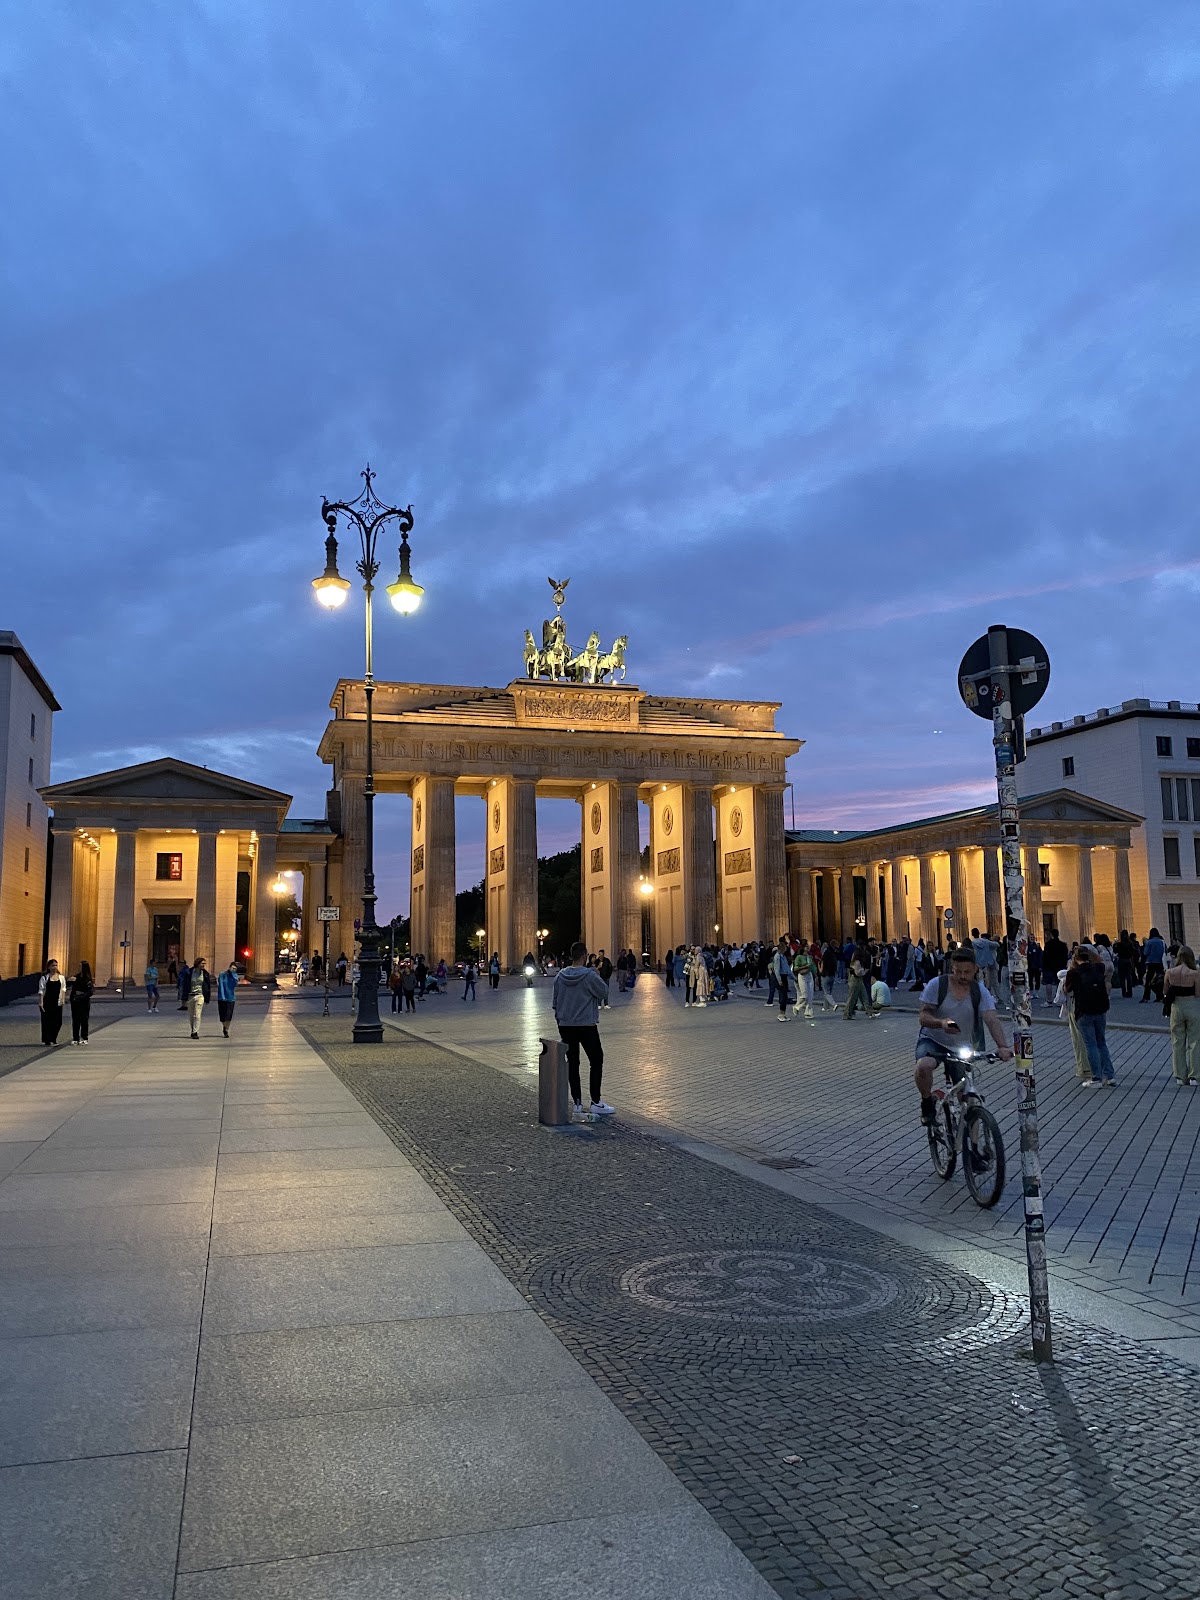 Berlin is perhaps the most complex and yet persevering city in the world. The Brandenburg Gate, as shown here, has overlooked Berlin for centuries; it has been in the background through years of violence, turmoil, and now, peace.